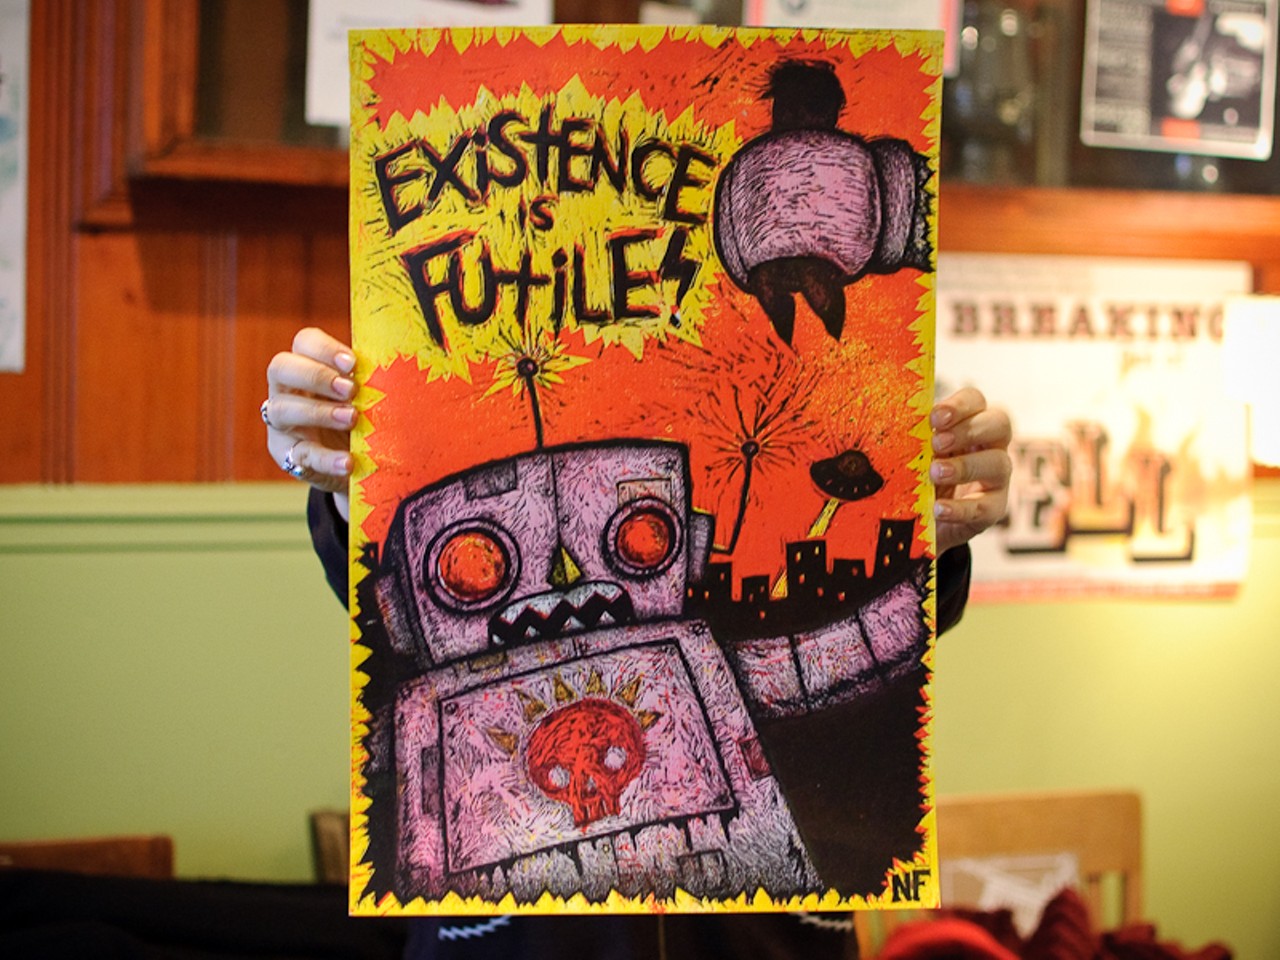 Perhaps Nick Francel&rsquo;s &ldquo;Existence is Futile&rdquo; print was conceived as a counterpoint to Maggie Filla&rsquo;s &ldquo;Peace-Bot,&rdquo; or perhaps it was just a coincidence they were both for sale on Saturday.